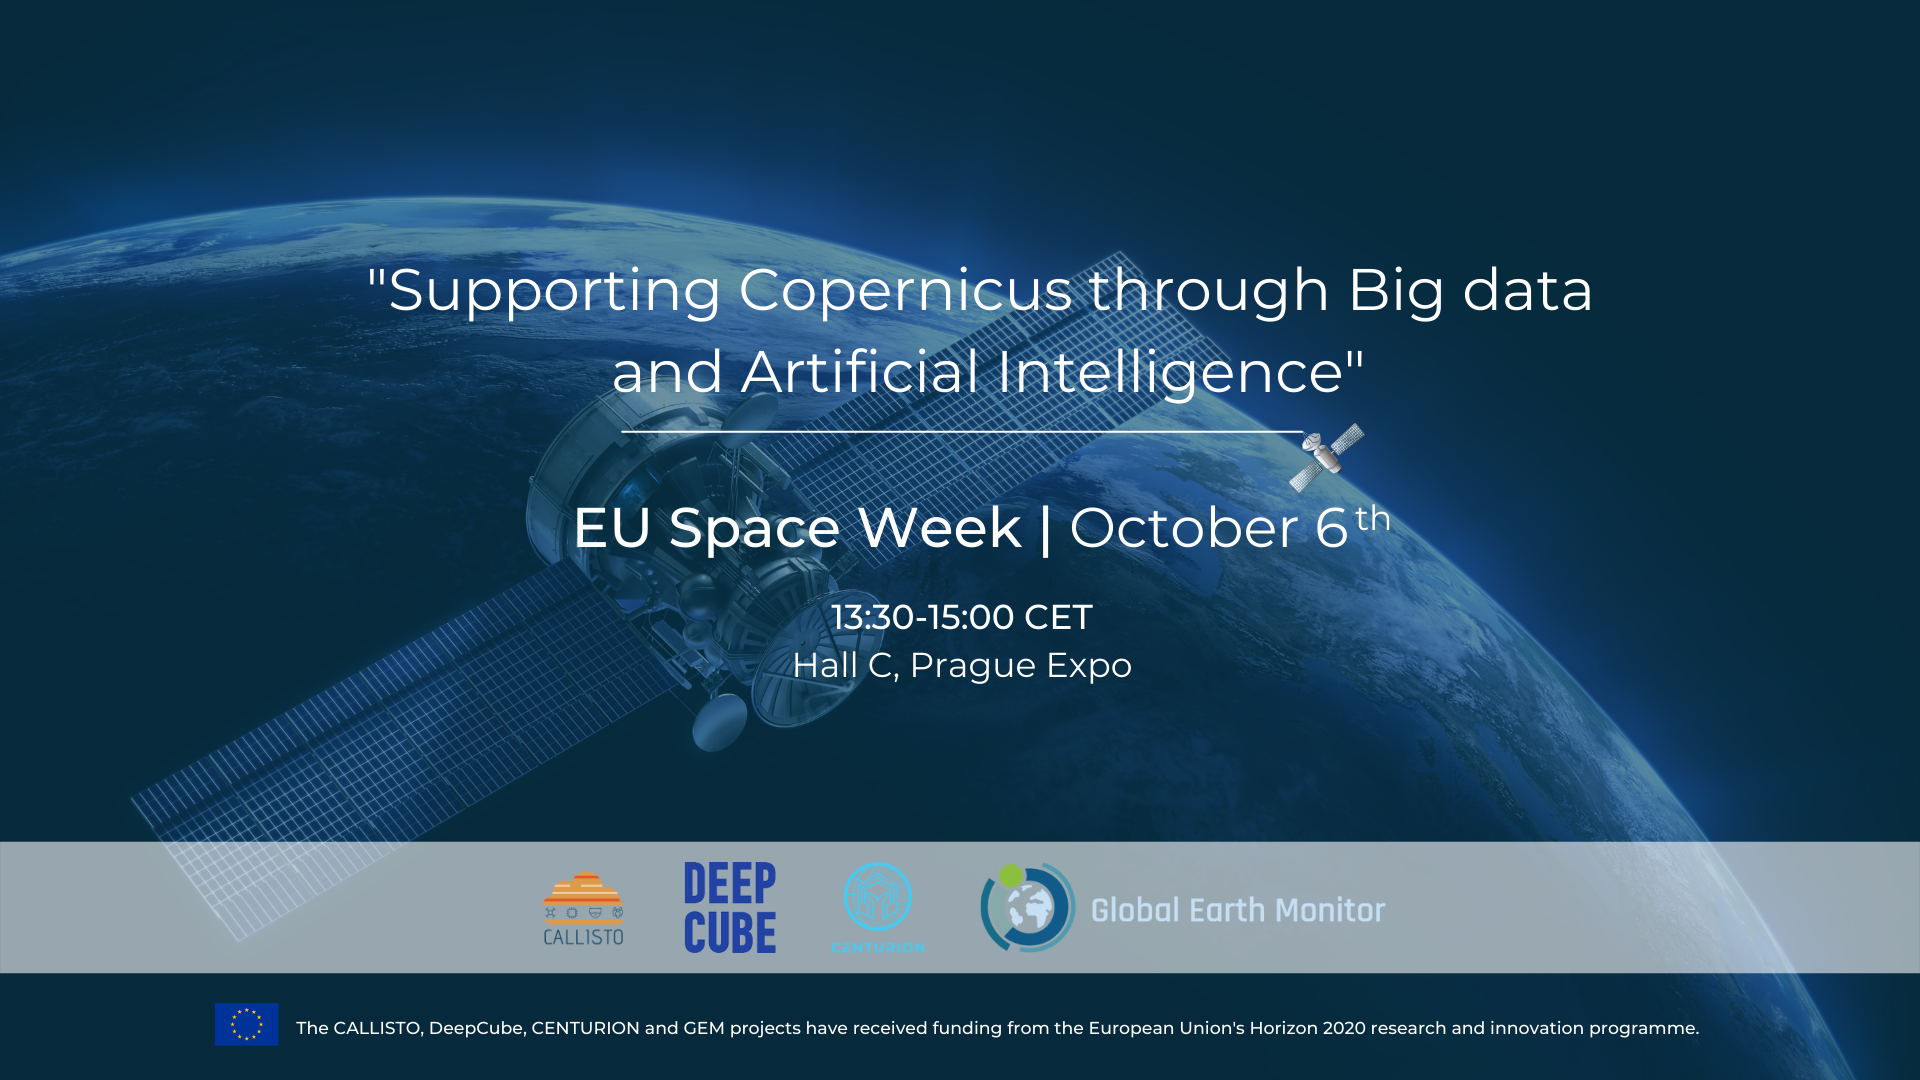 SatCen participates to the “Supporting Copernicus through Big Data and Artificial Intelligence” event